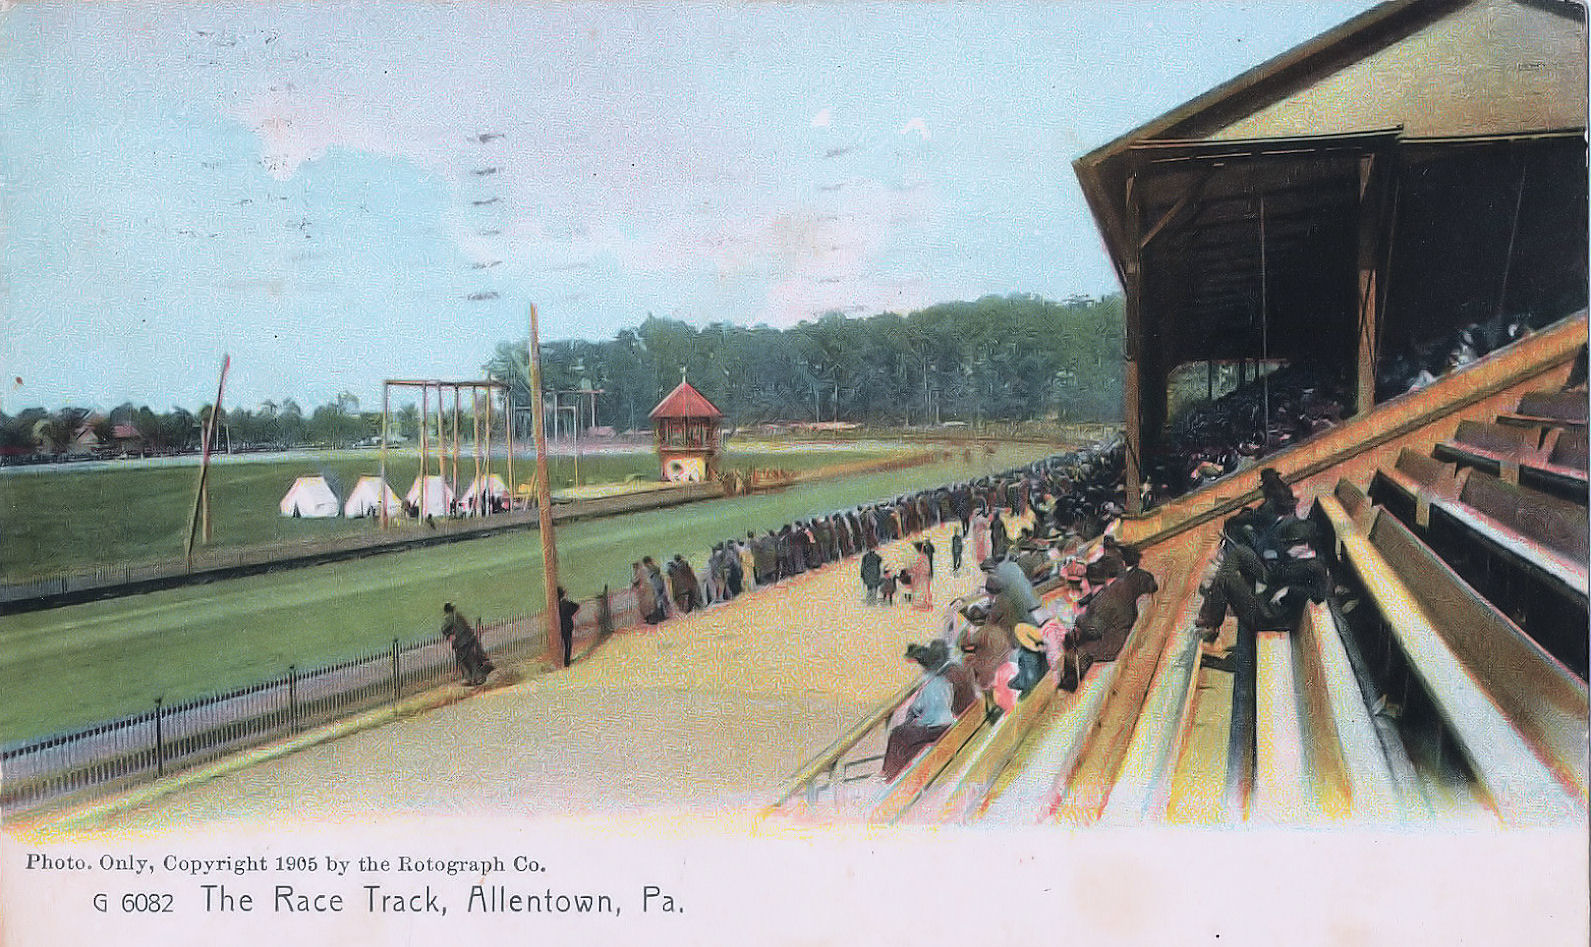 In a vintage postcard style photo, people sit in the bleachers in front of a horseracing track. 